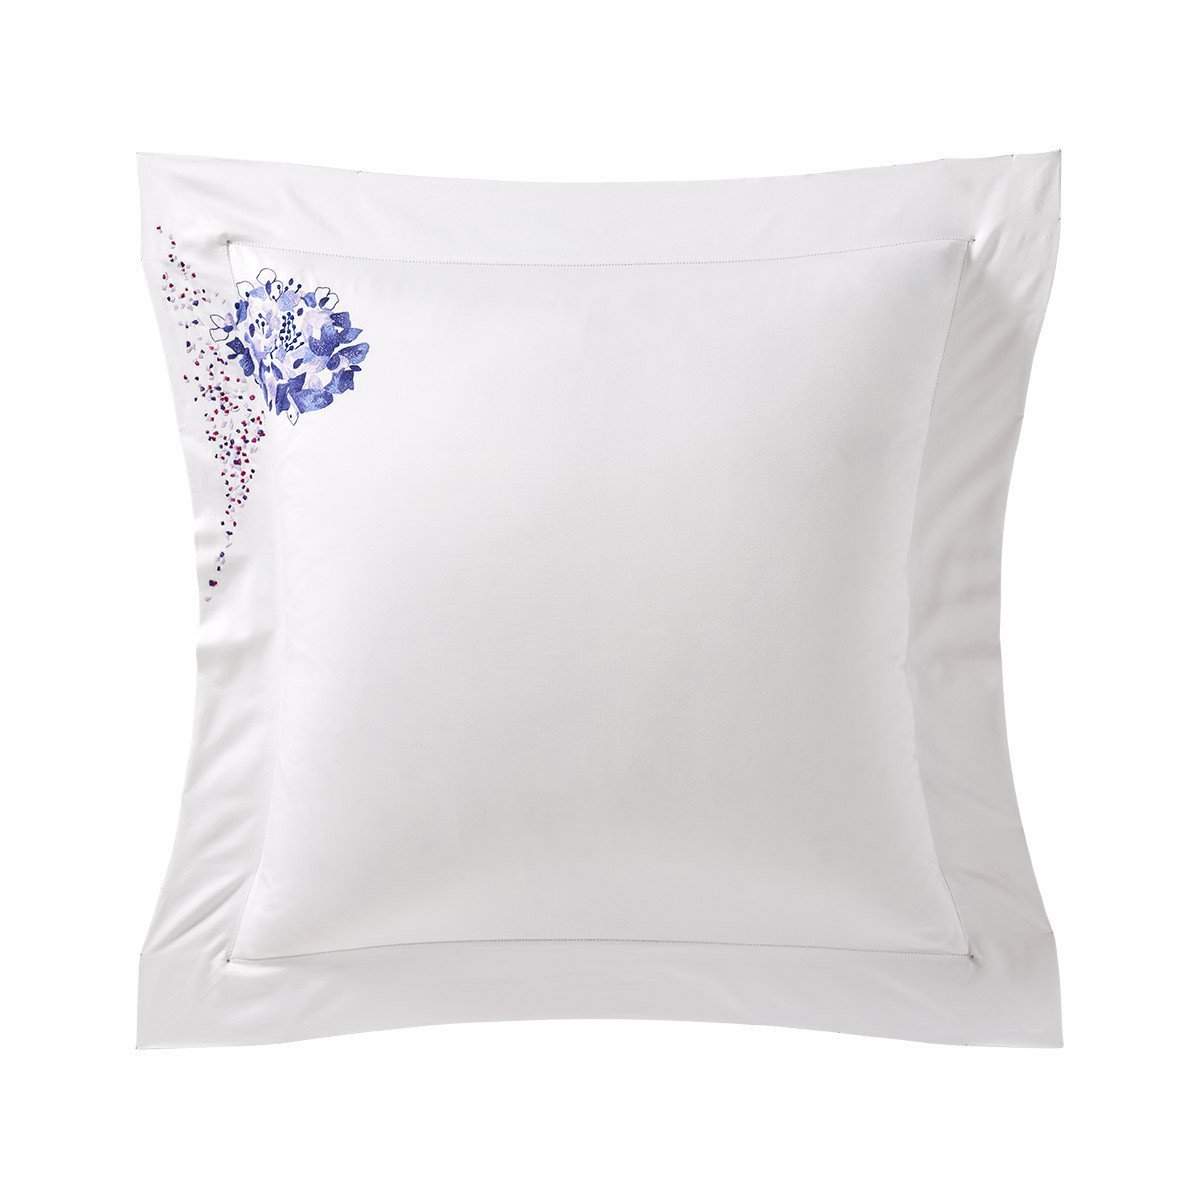 Fig Linens - Toccata Bedding by Yves Delorme - Euro Sham